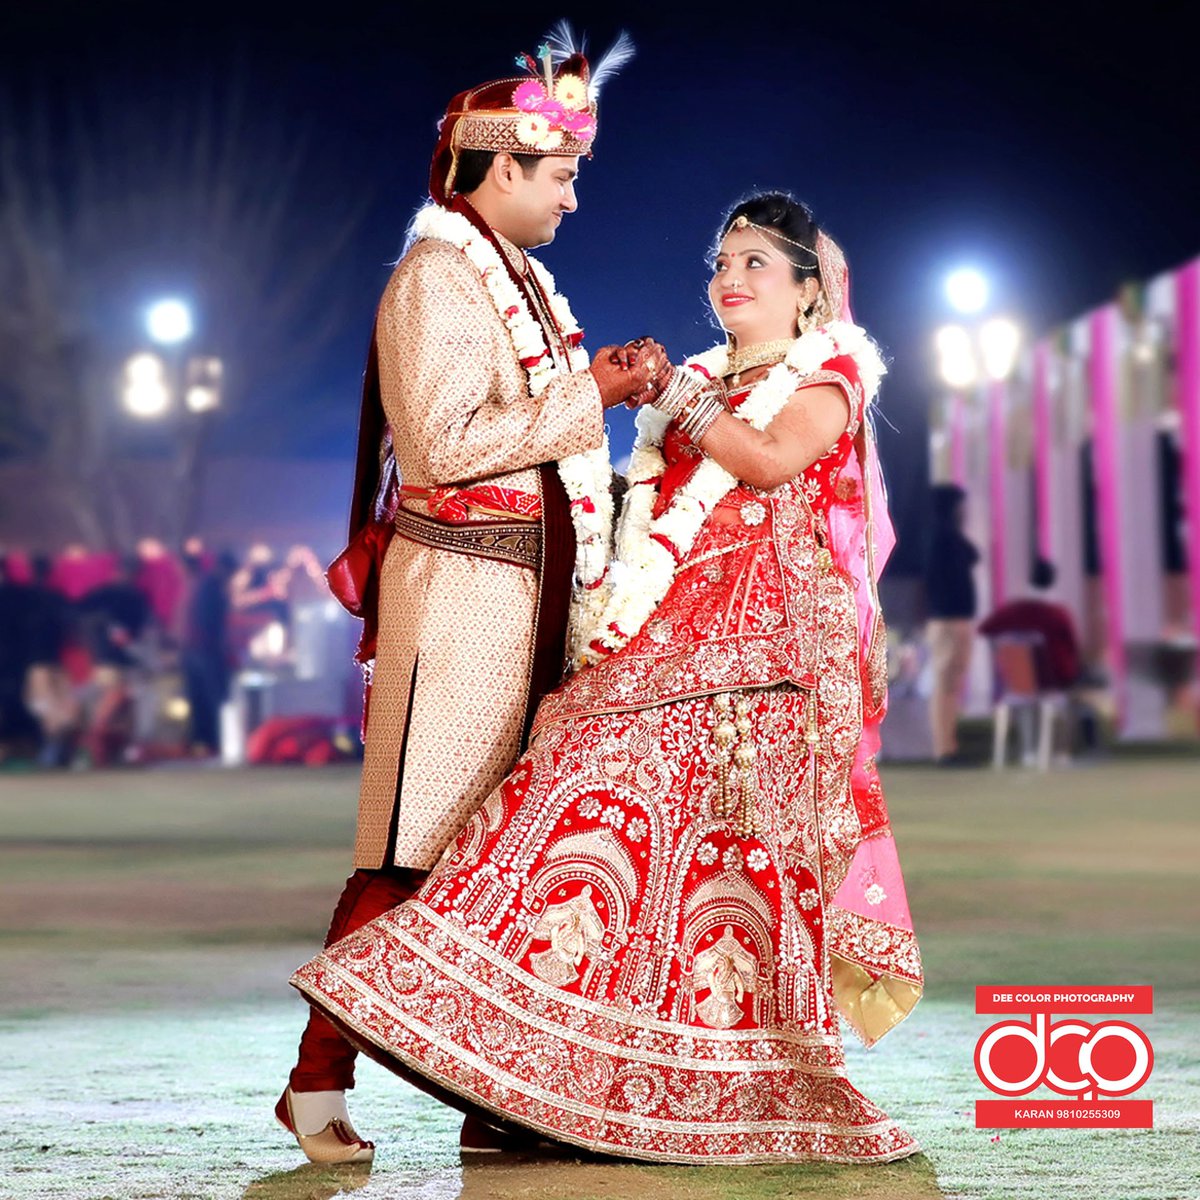 'You know you're in love when you can't fall asleep because reality is finally better than your dreams.'  #BestWeddingPhotographerInDelhi #PreWeddingPhotographer More Visit :    goo.gl/r5HF8P